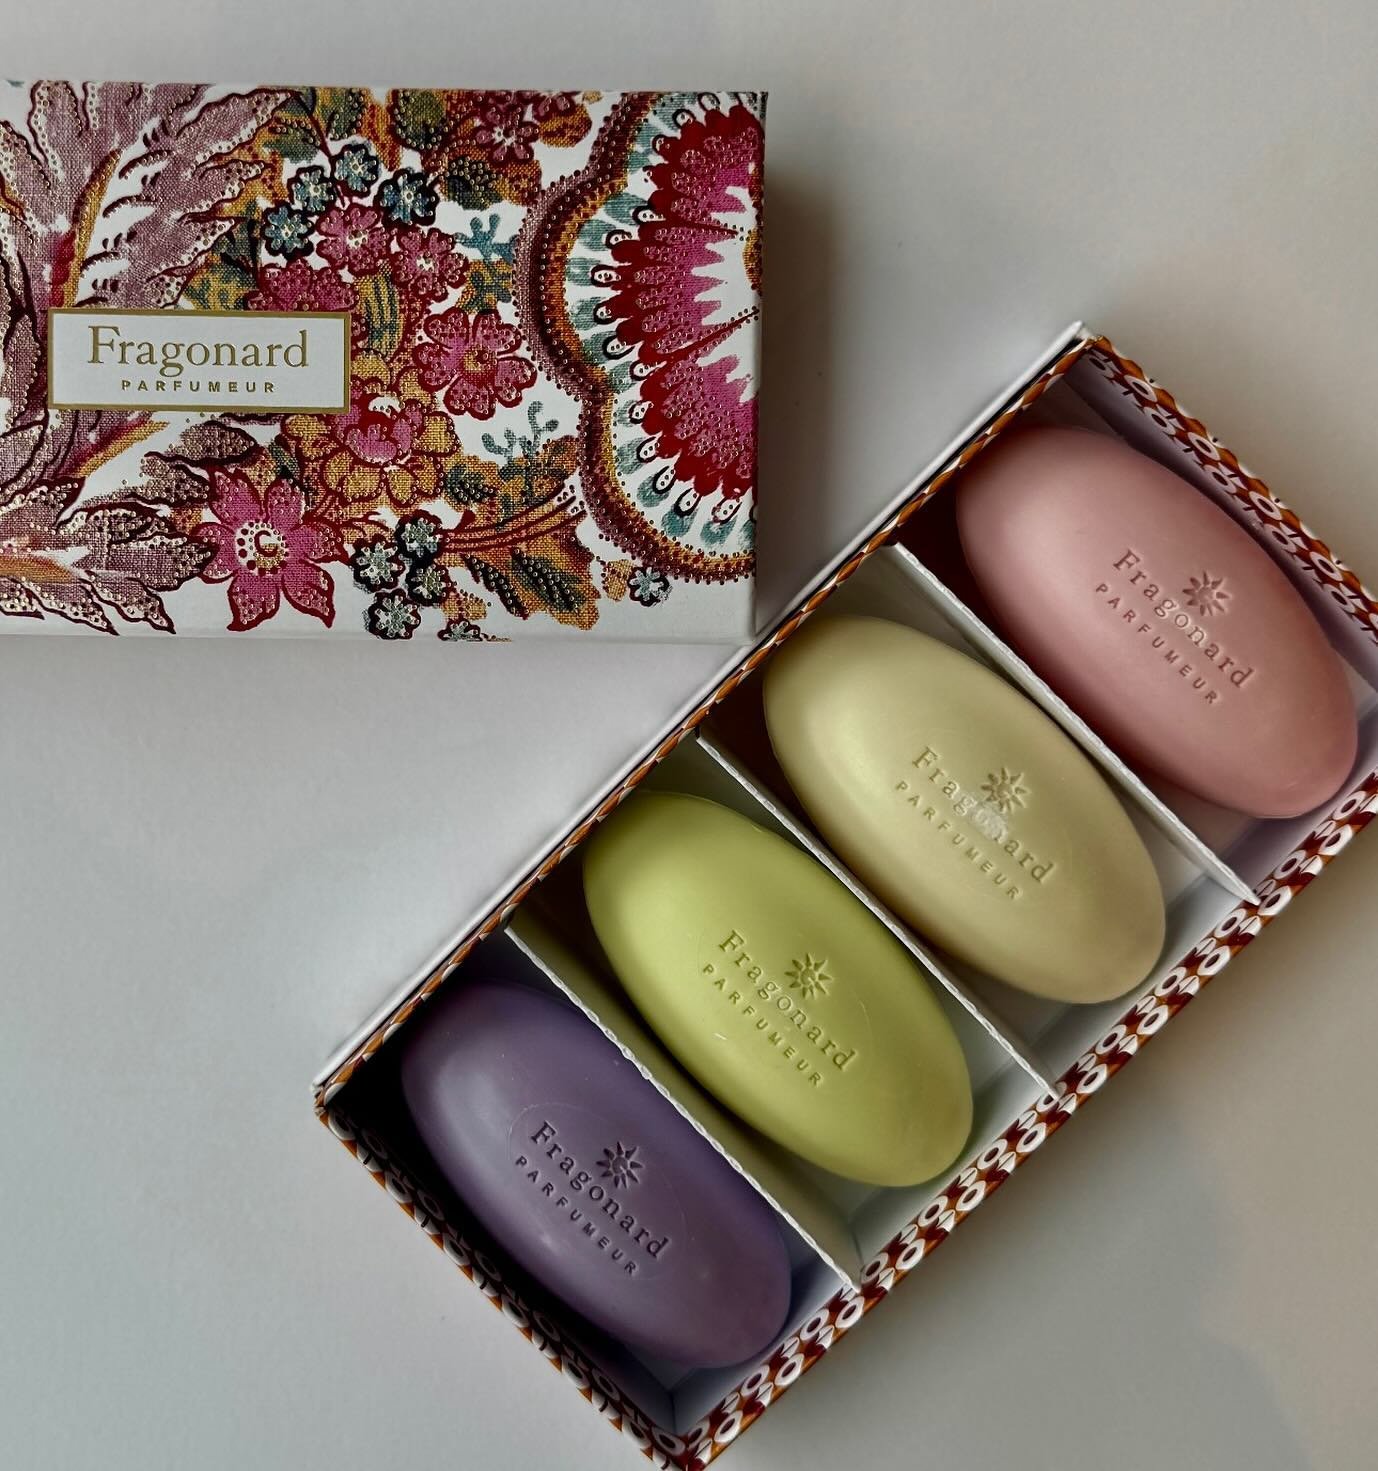 Fragonard soaps from France exclusively at Emily Joubert. Just in  time for Mother&rsquo;s Day! Stop by to see our collection. 📸who0aitsrolo 
#fragonardparfumeur #fragonard #mothersday